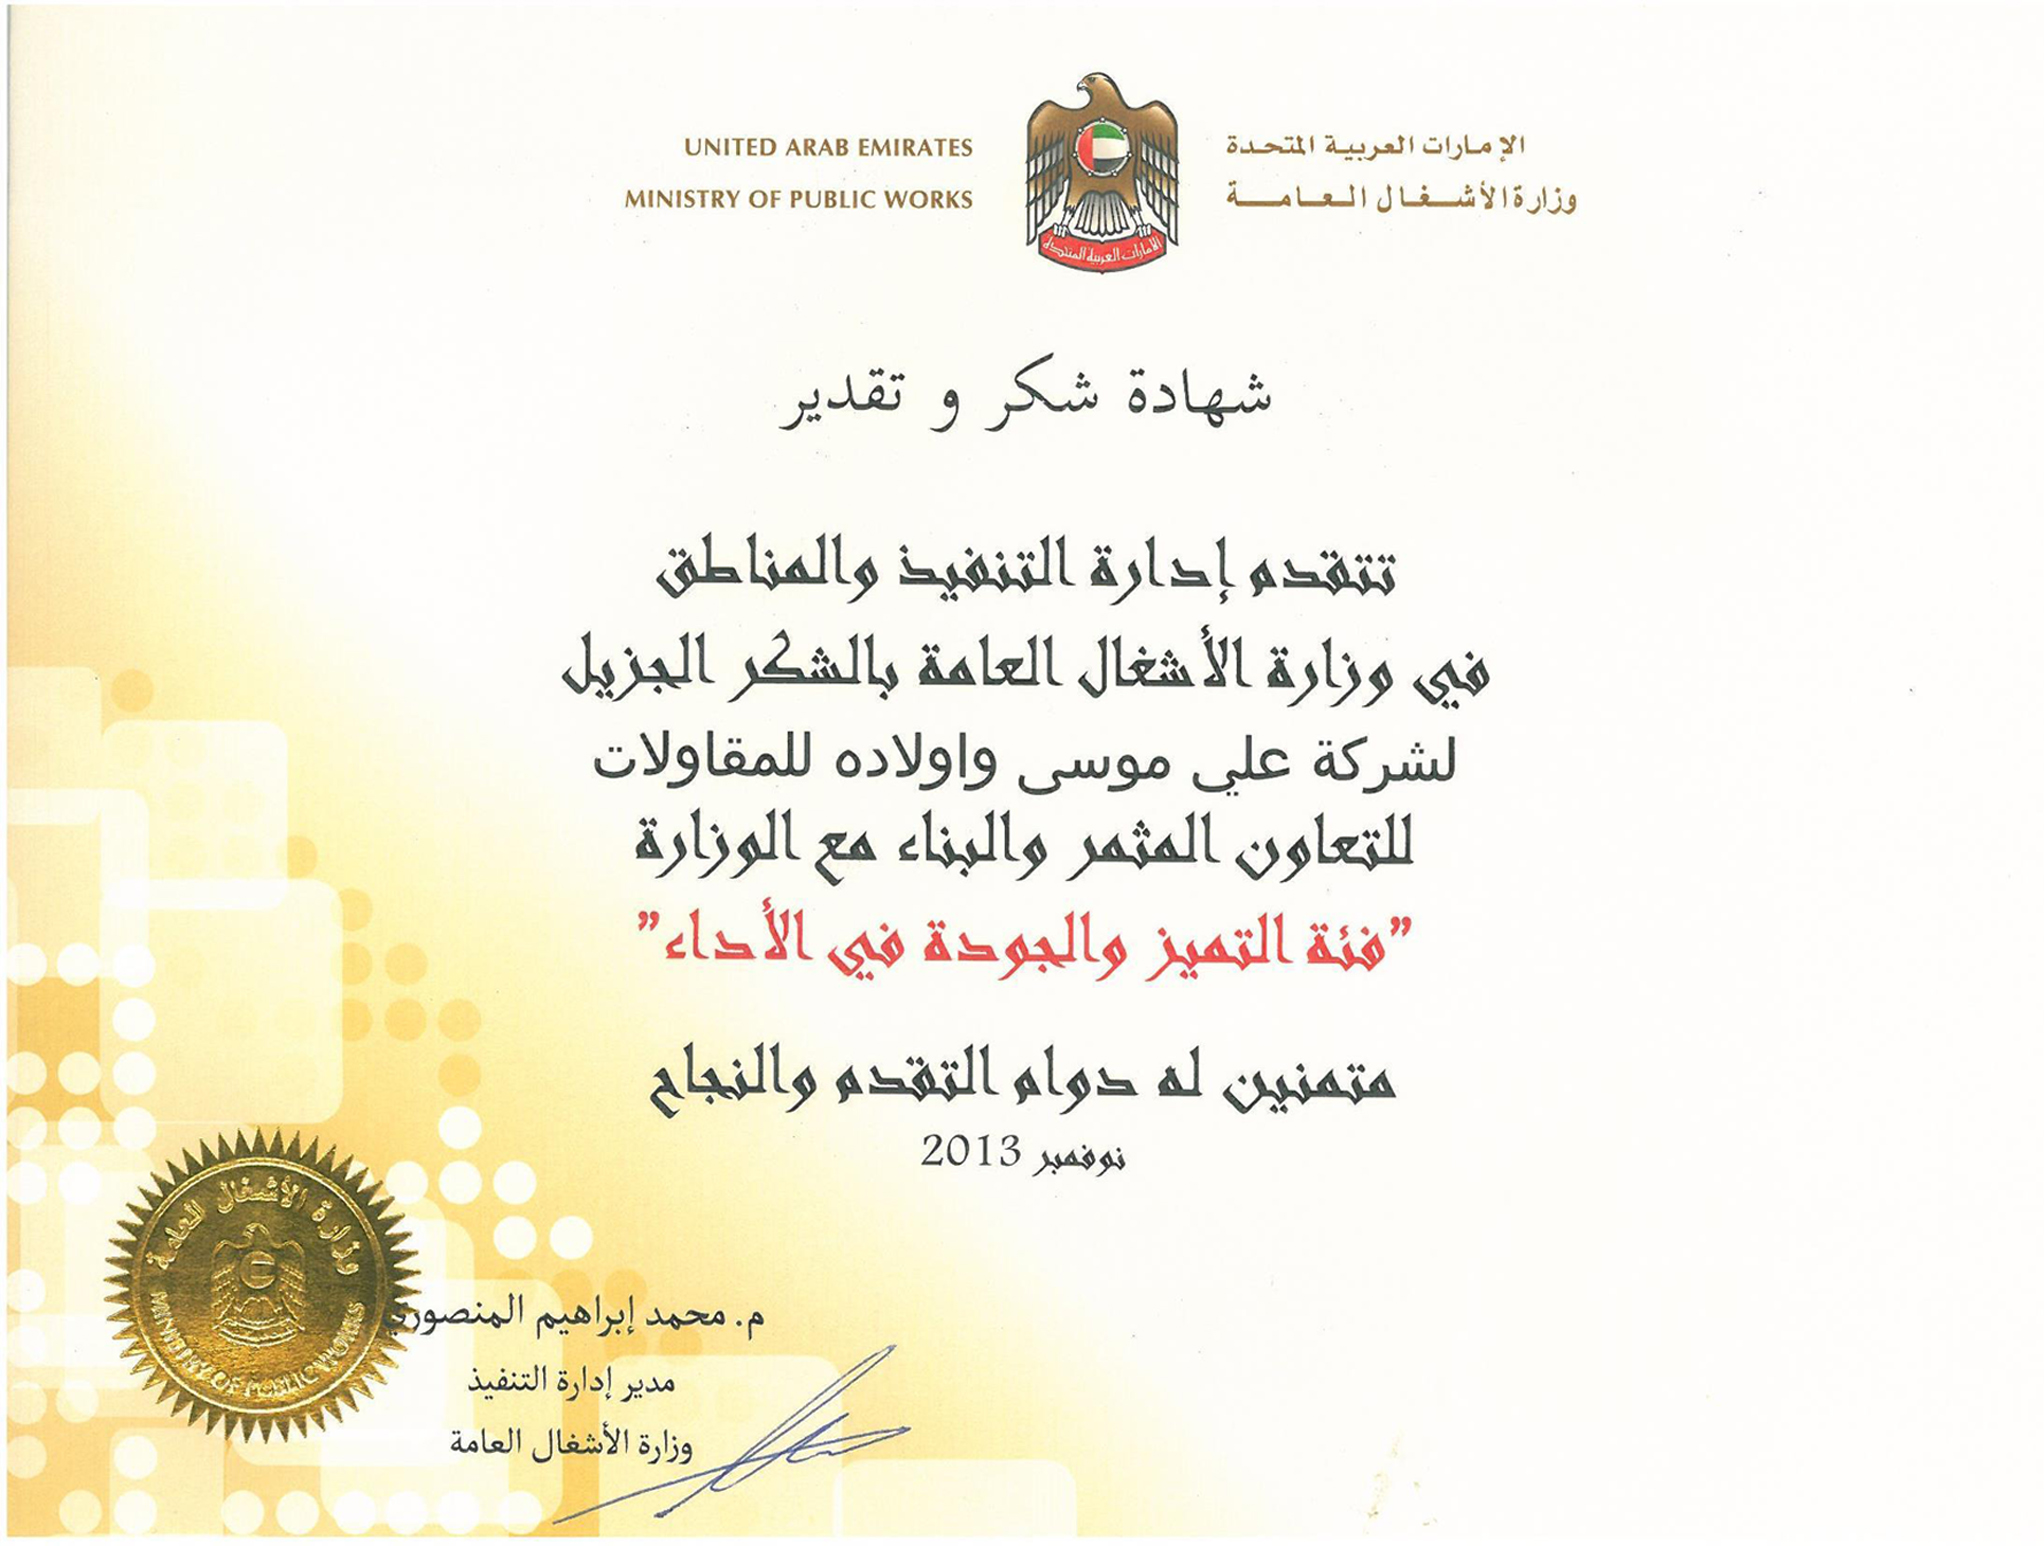 Ali Mousa & Sons Contracting receives “Excellence& Quality Award“ for 2013 from M/s. Ministry of Public works